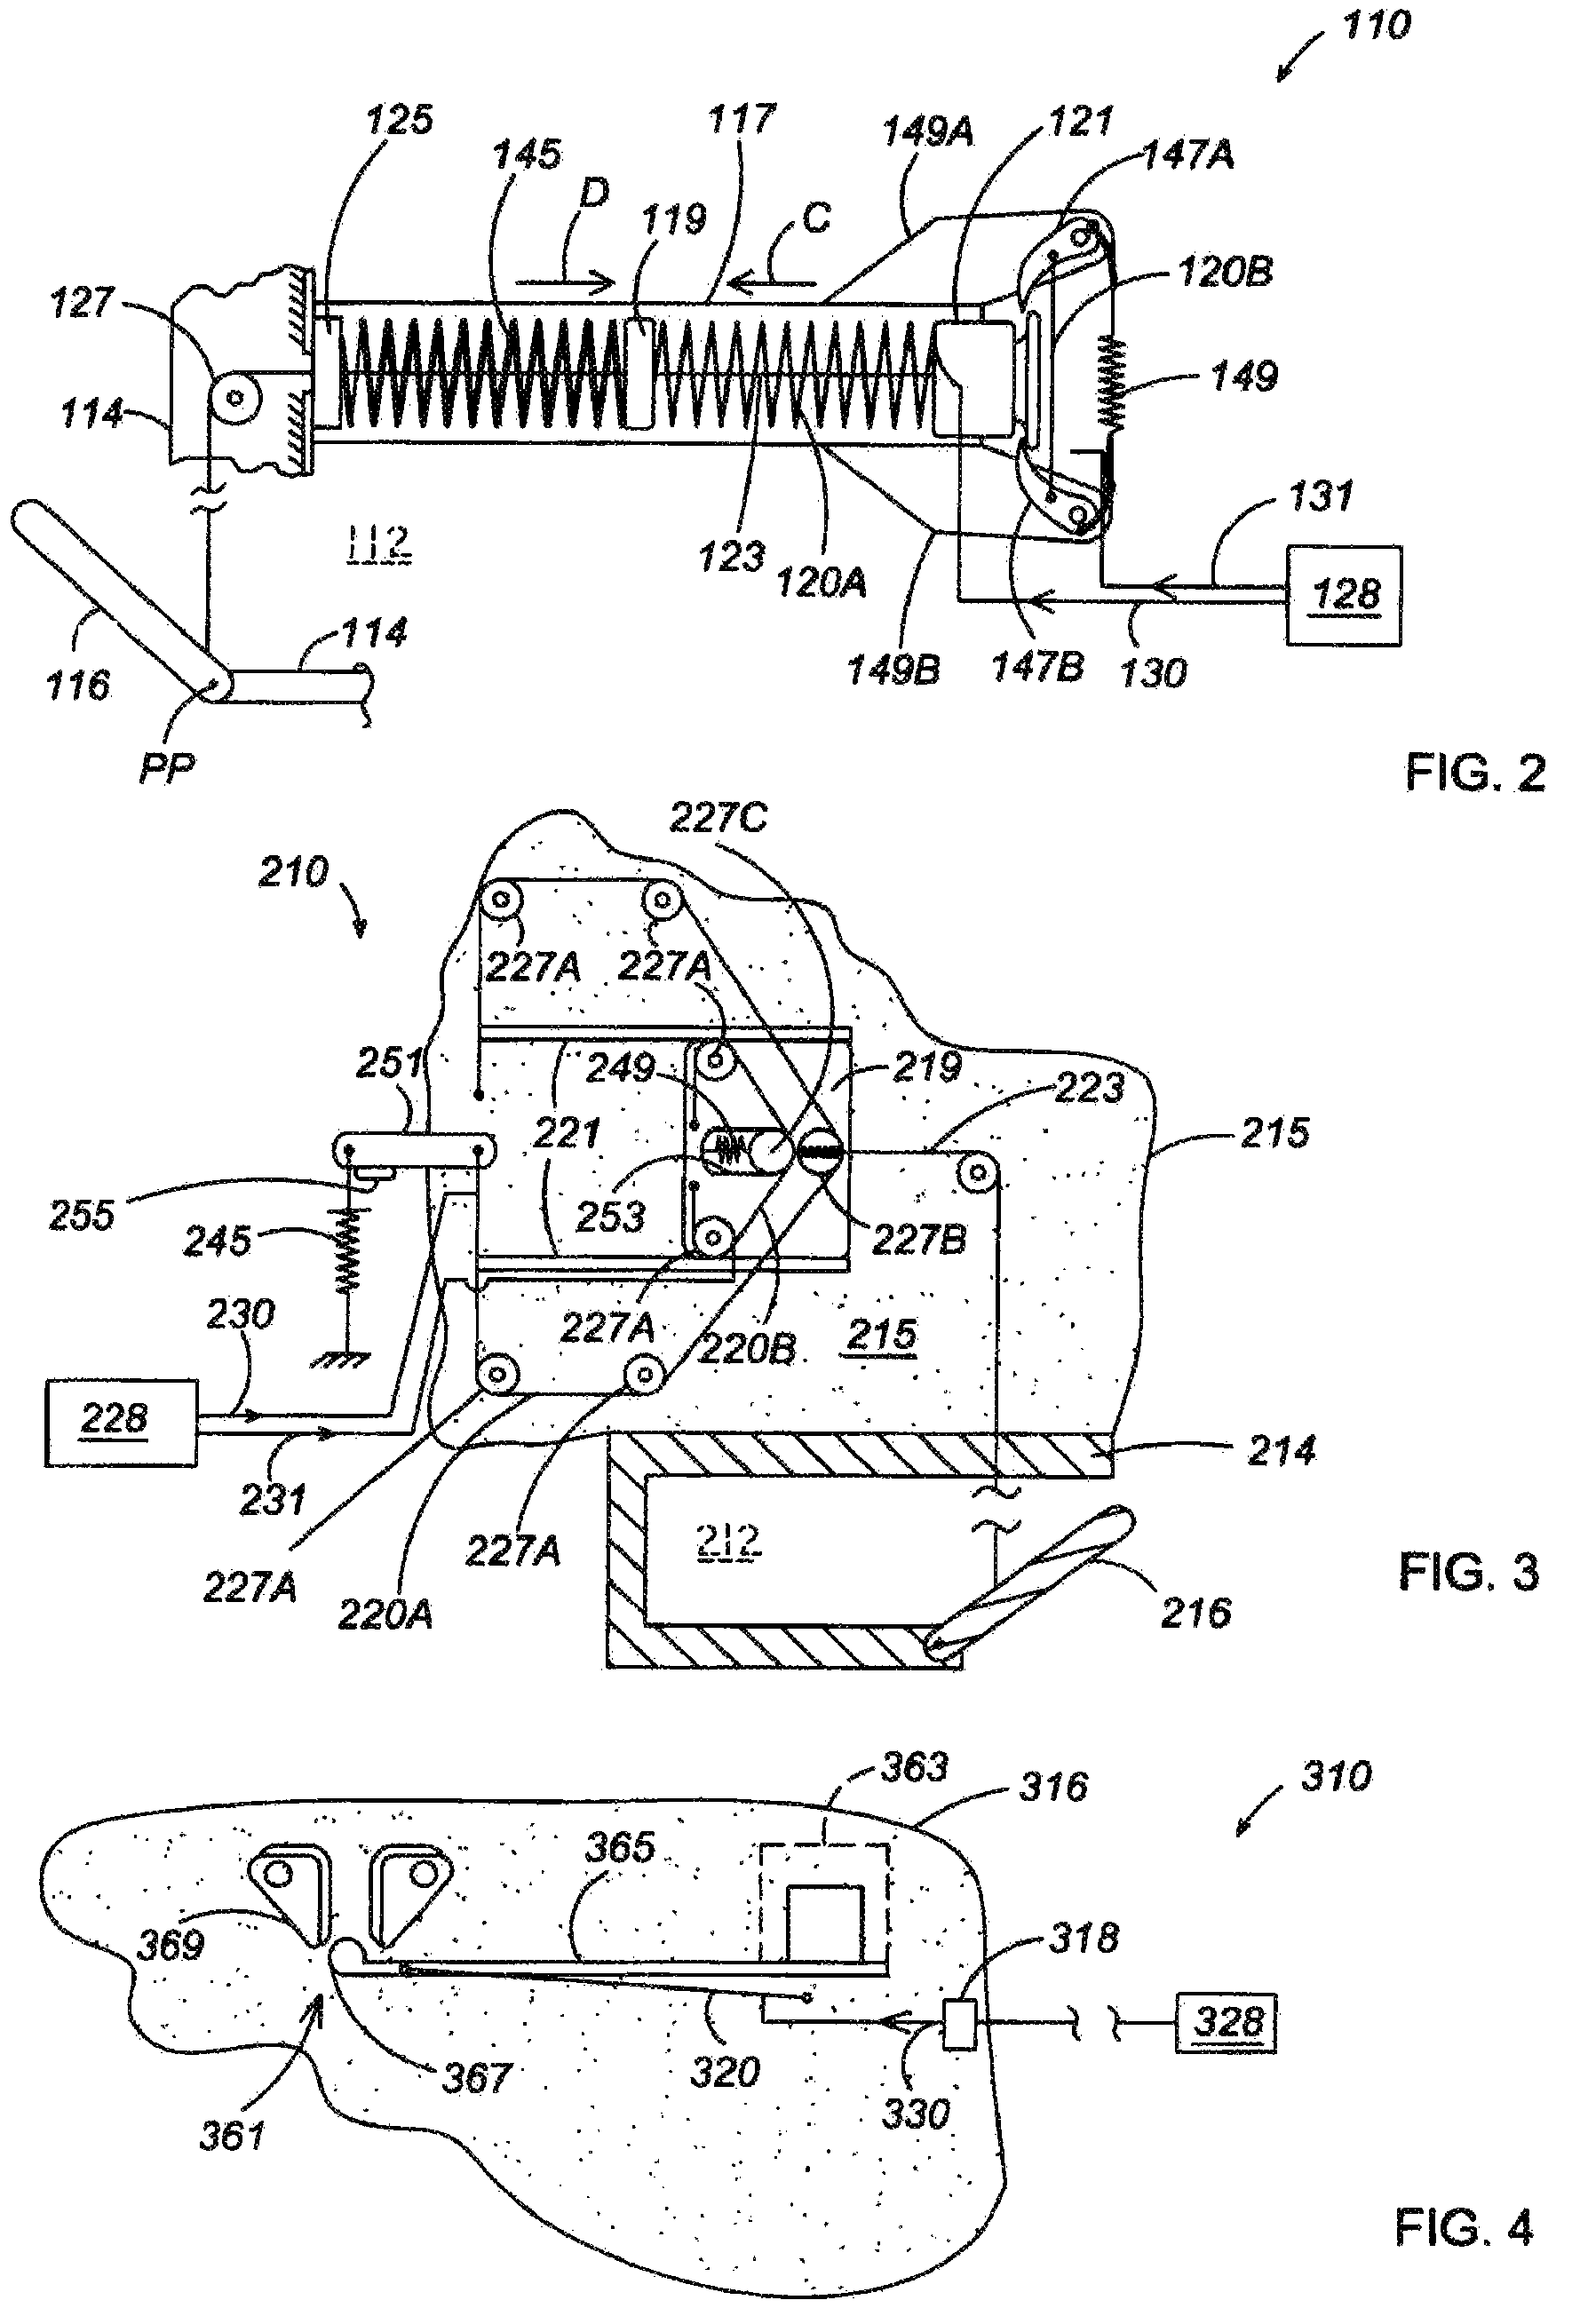 Compartment access system with active material component and method for controlling access to an interior compartment